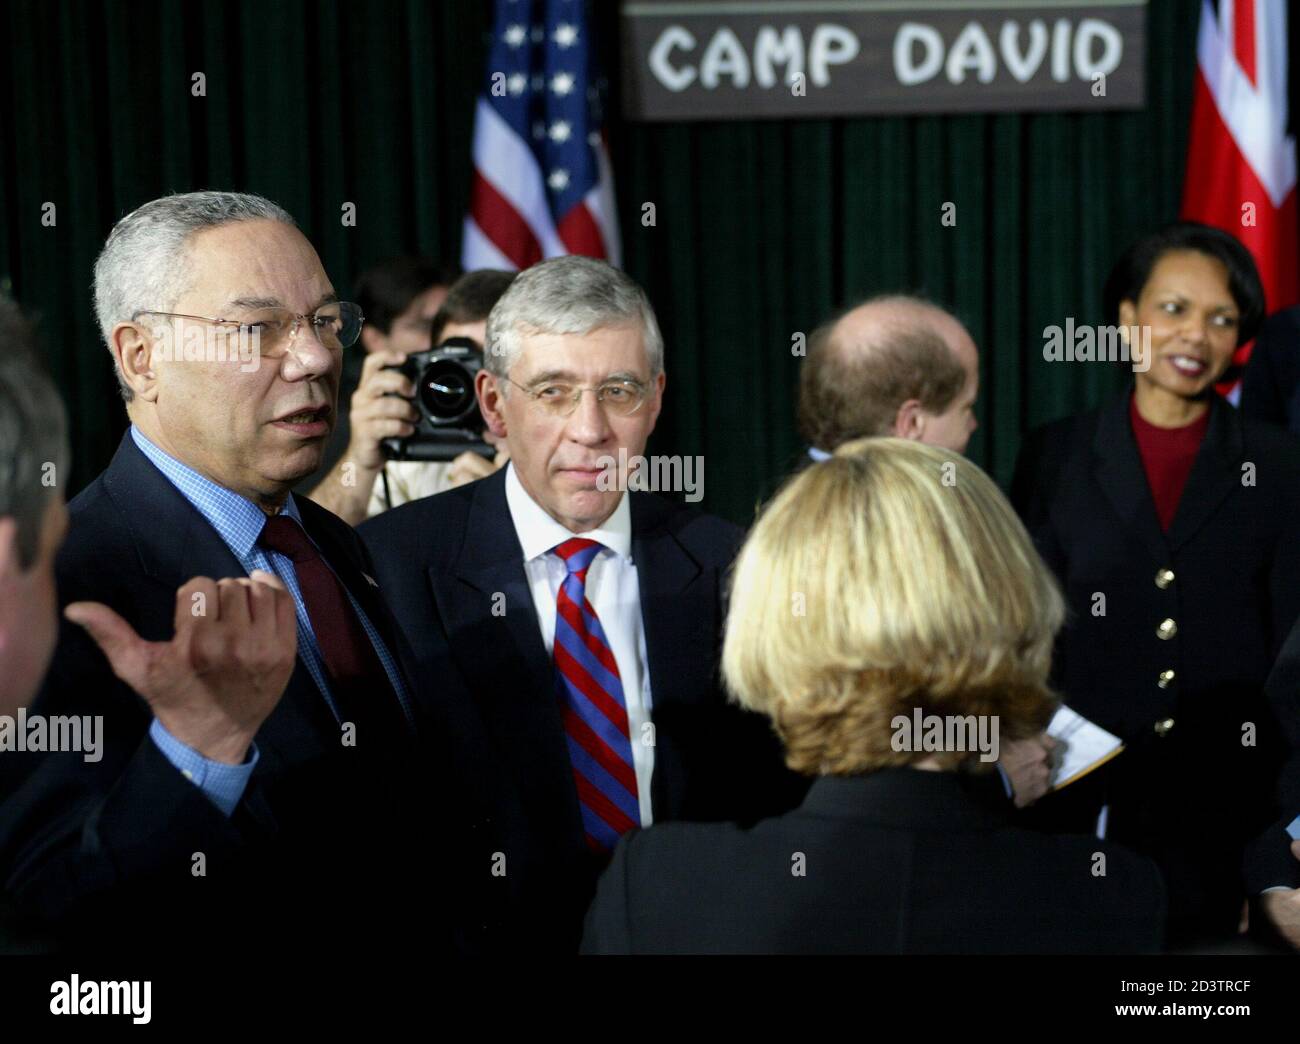 U.S. Secretary of State Colin Powell (L) talks with British Foreign  Secretary Jack Straw (C) and other officials, as U.S. National Security  Advisor Condoleezza Rice (Far R) looks on, before a news